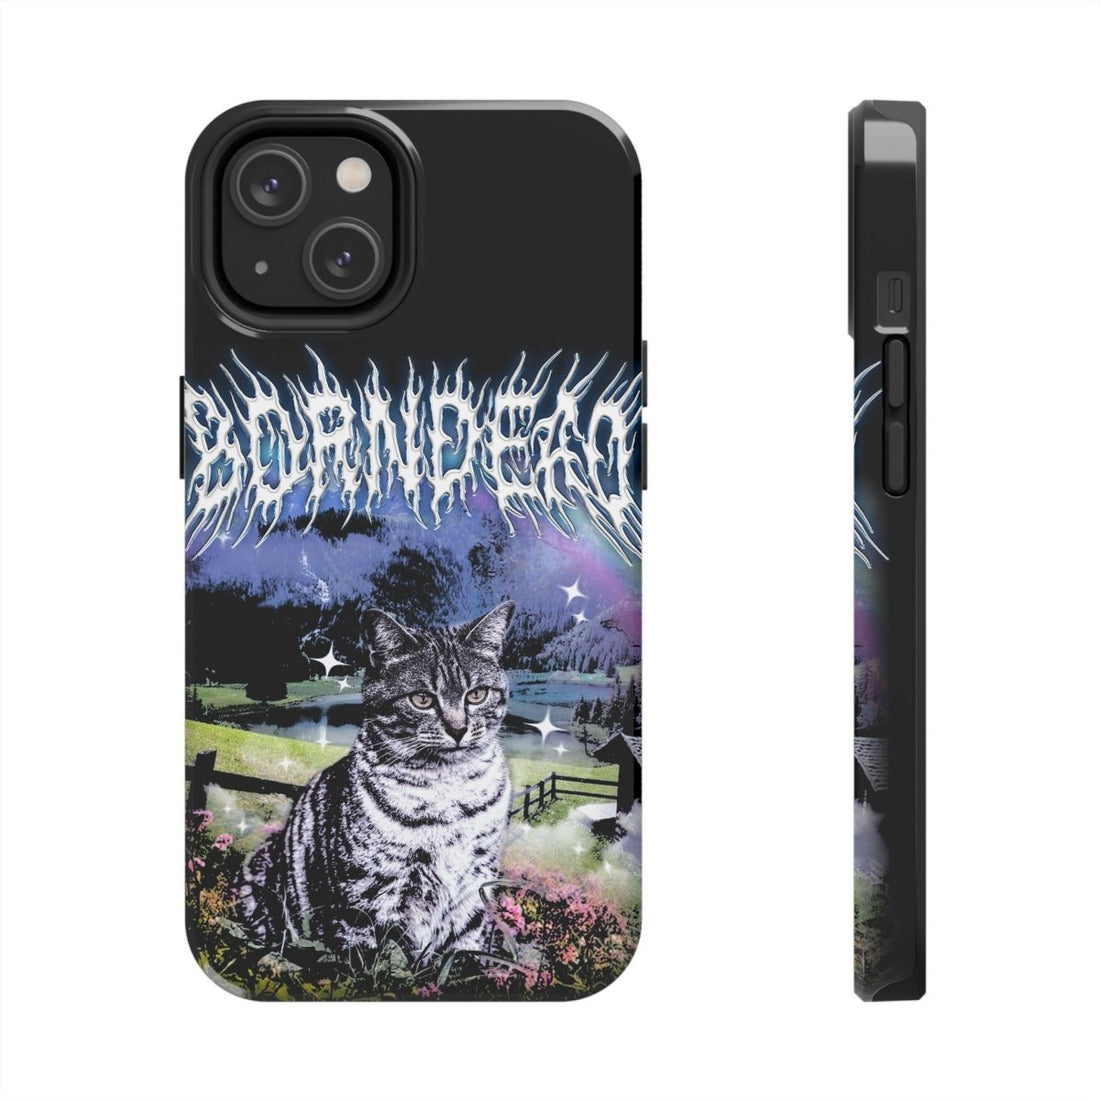 Death Metal Kitty Goth Inspired Phone Cases